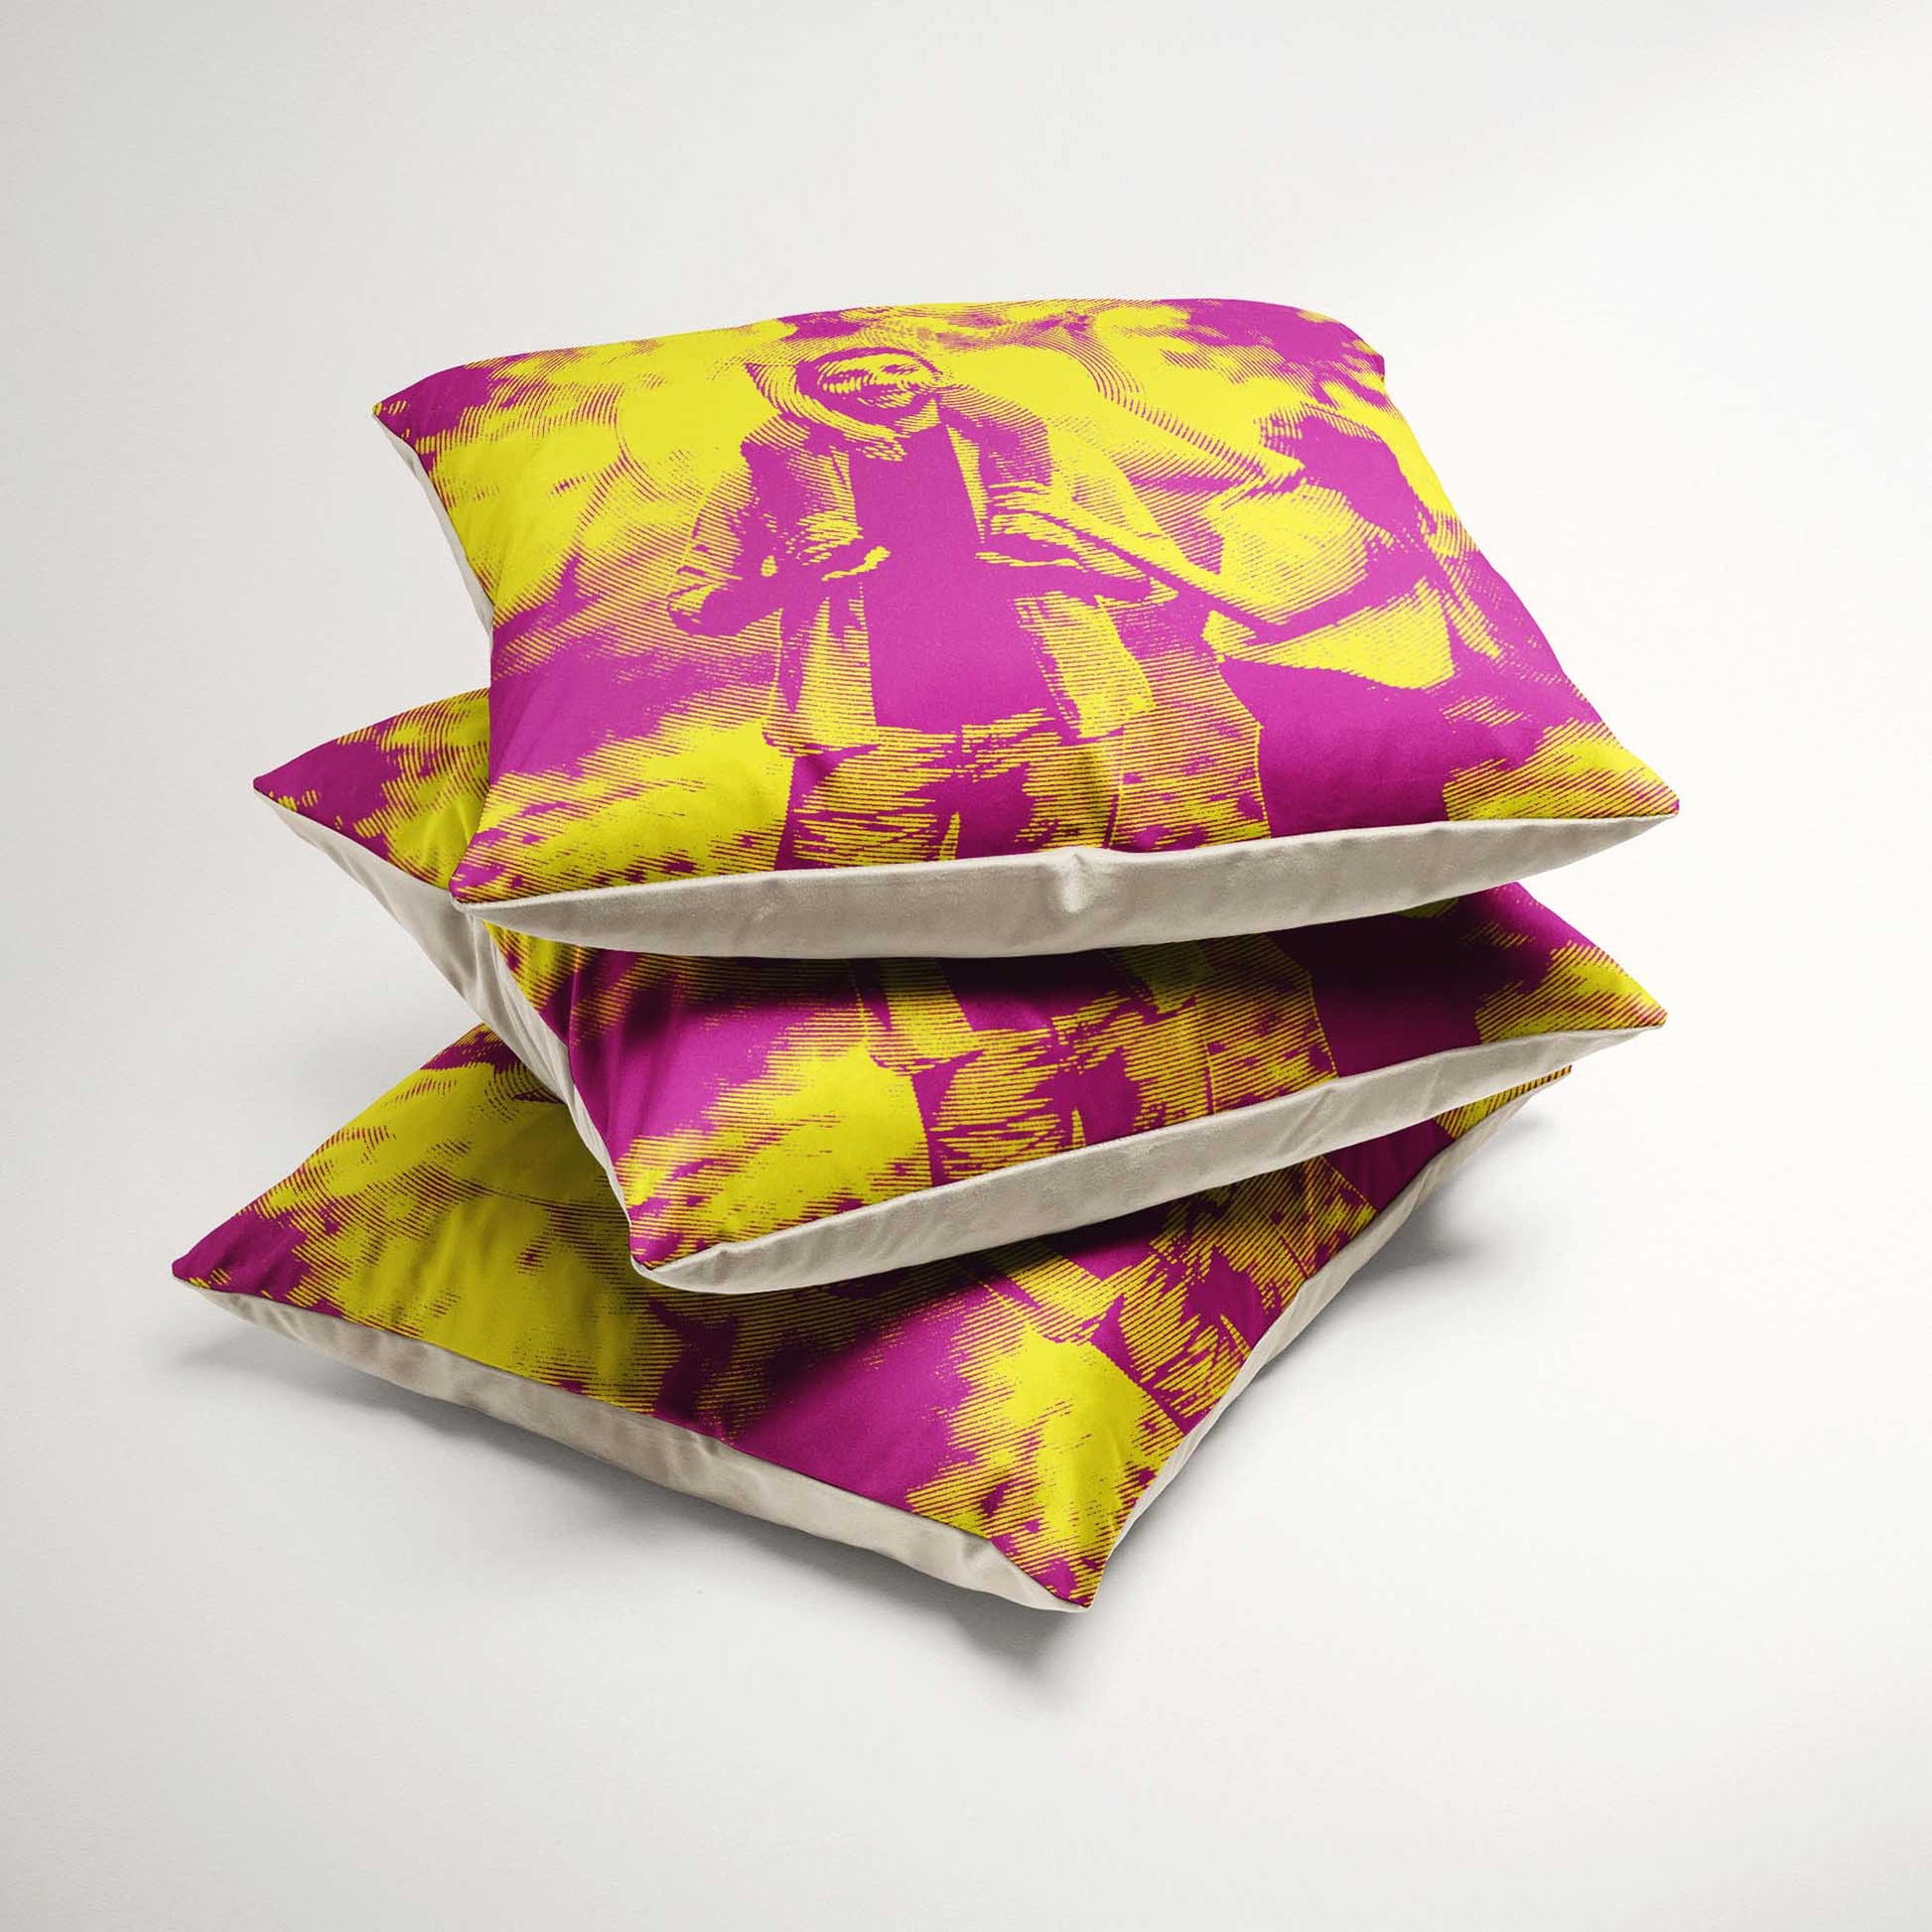 Personalised Yellow & Pink Texture Cushion - Embrace the warmth and softness of velvet fabric as you relax and unwind. Custom printed from your photo, it adds a unique and personal touch to your interior design